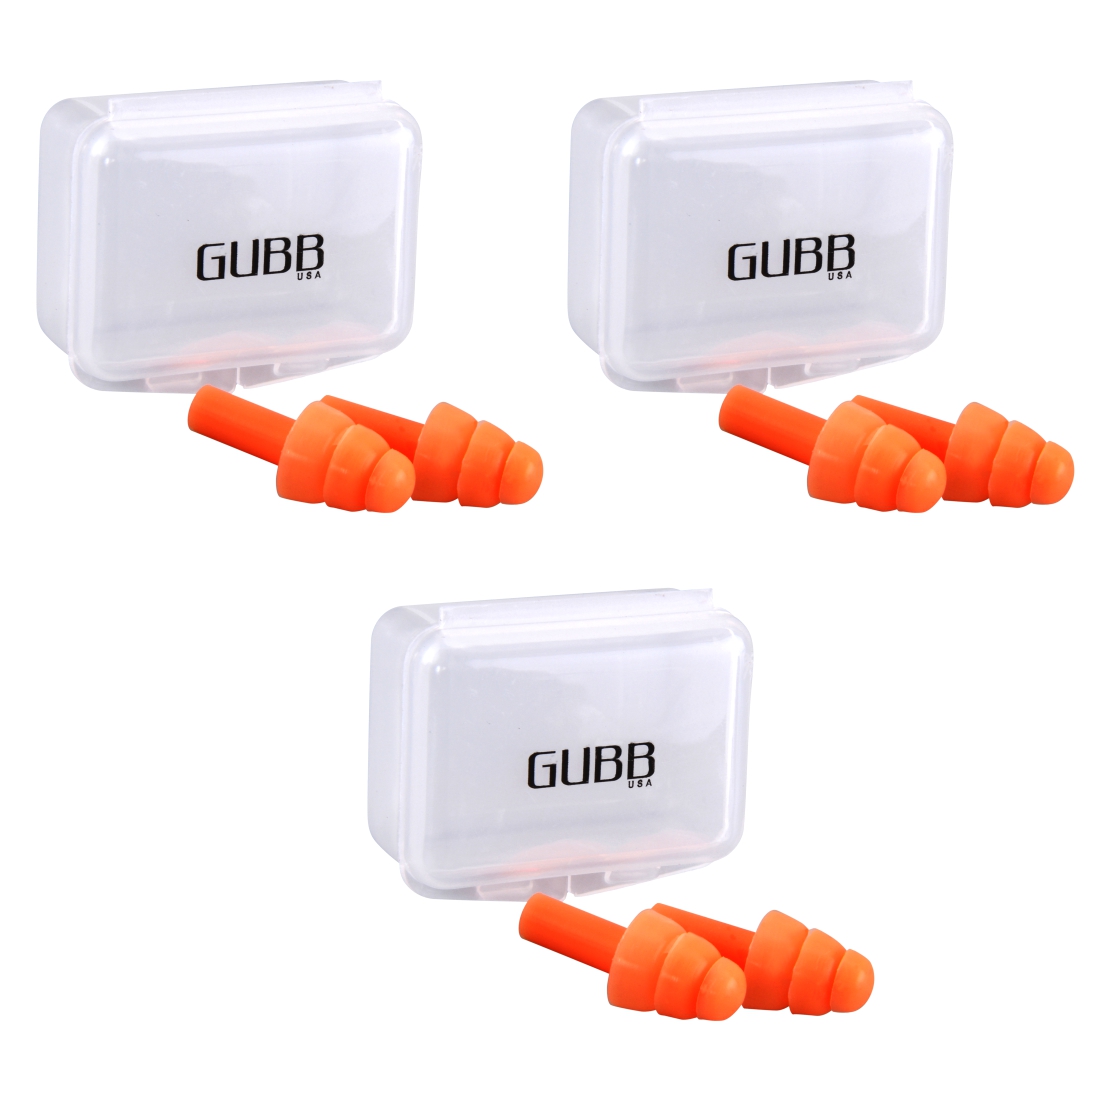 Silicon Earplugs Pack of 3